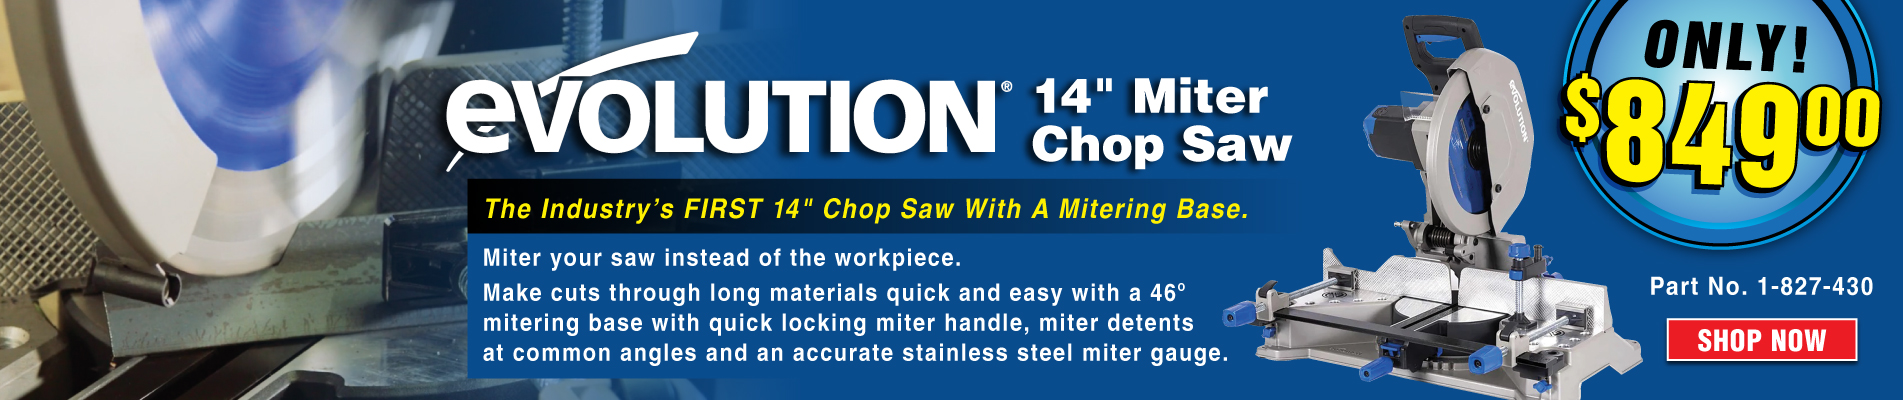 Shop the new Evolution Power Tool Miter Chop Saw